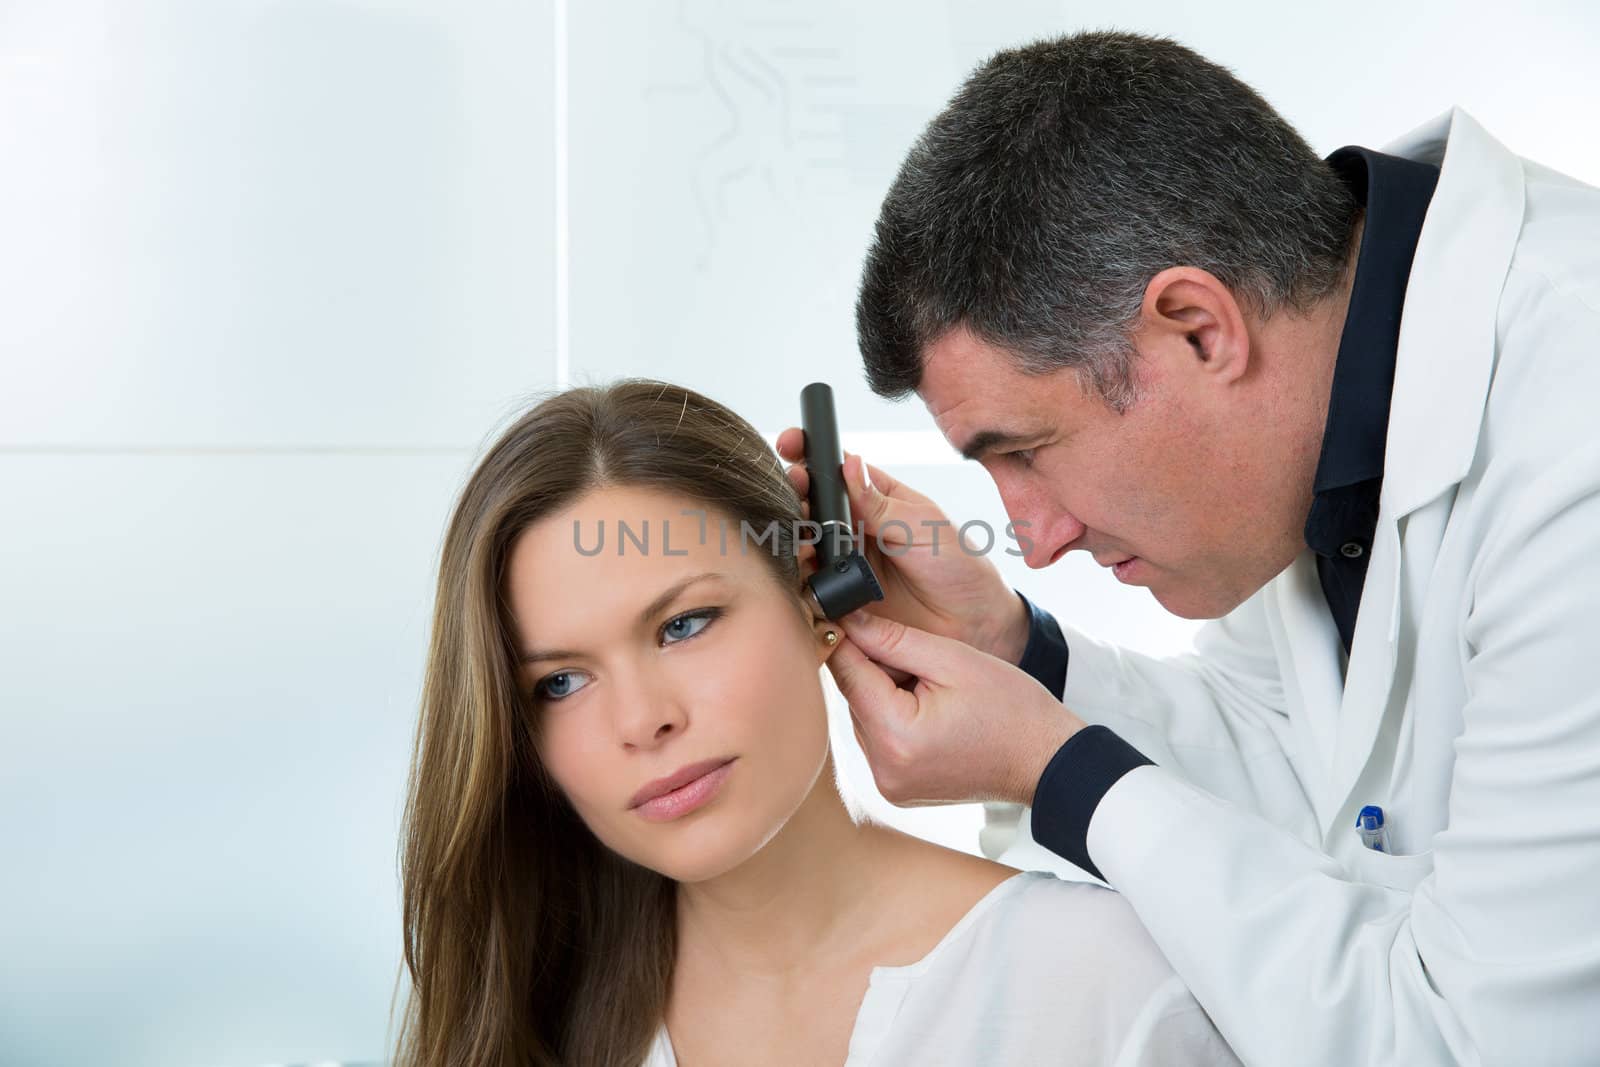 Doctor ENT checking ear with otoscope to woman patient by lunamarina